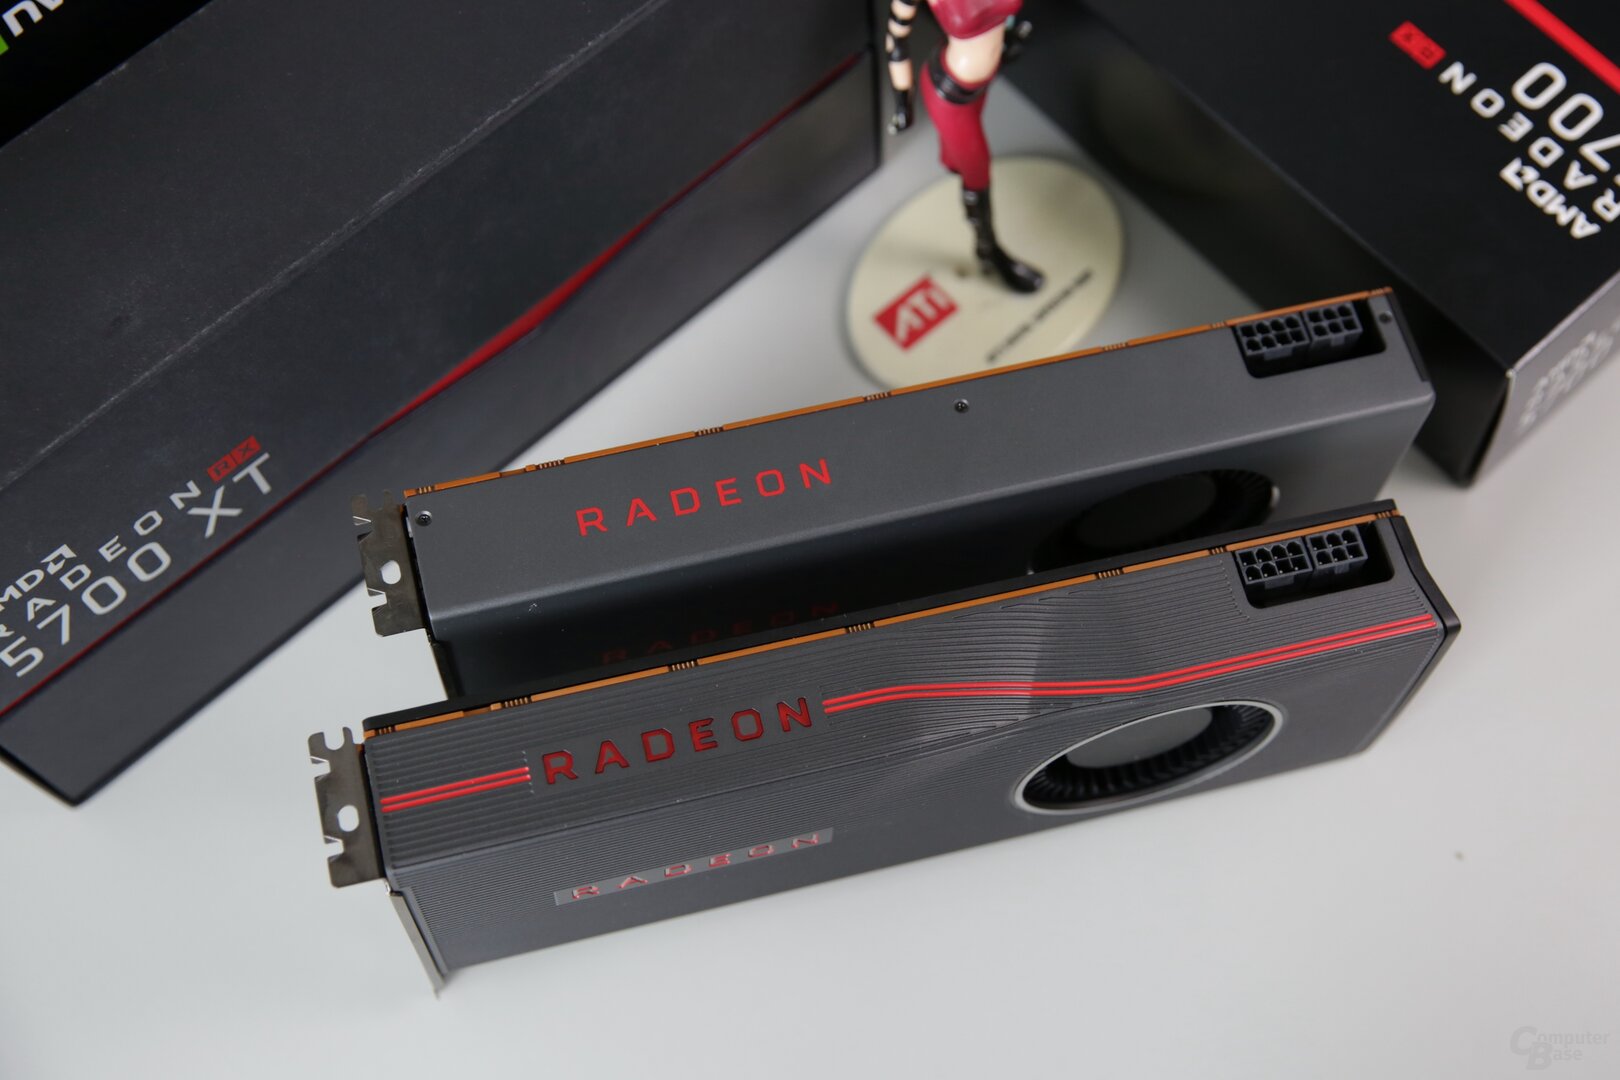 The Radeon RX 5700 (XT) with 6 and 8 PINs